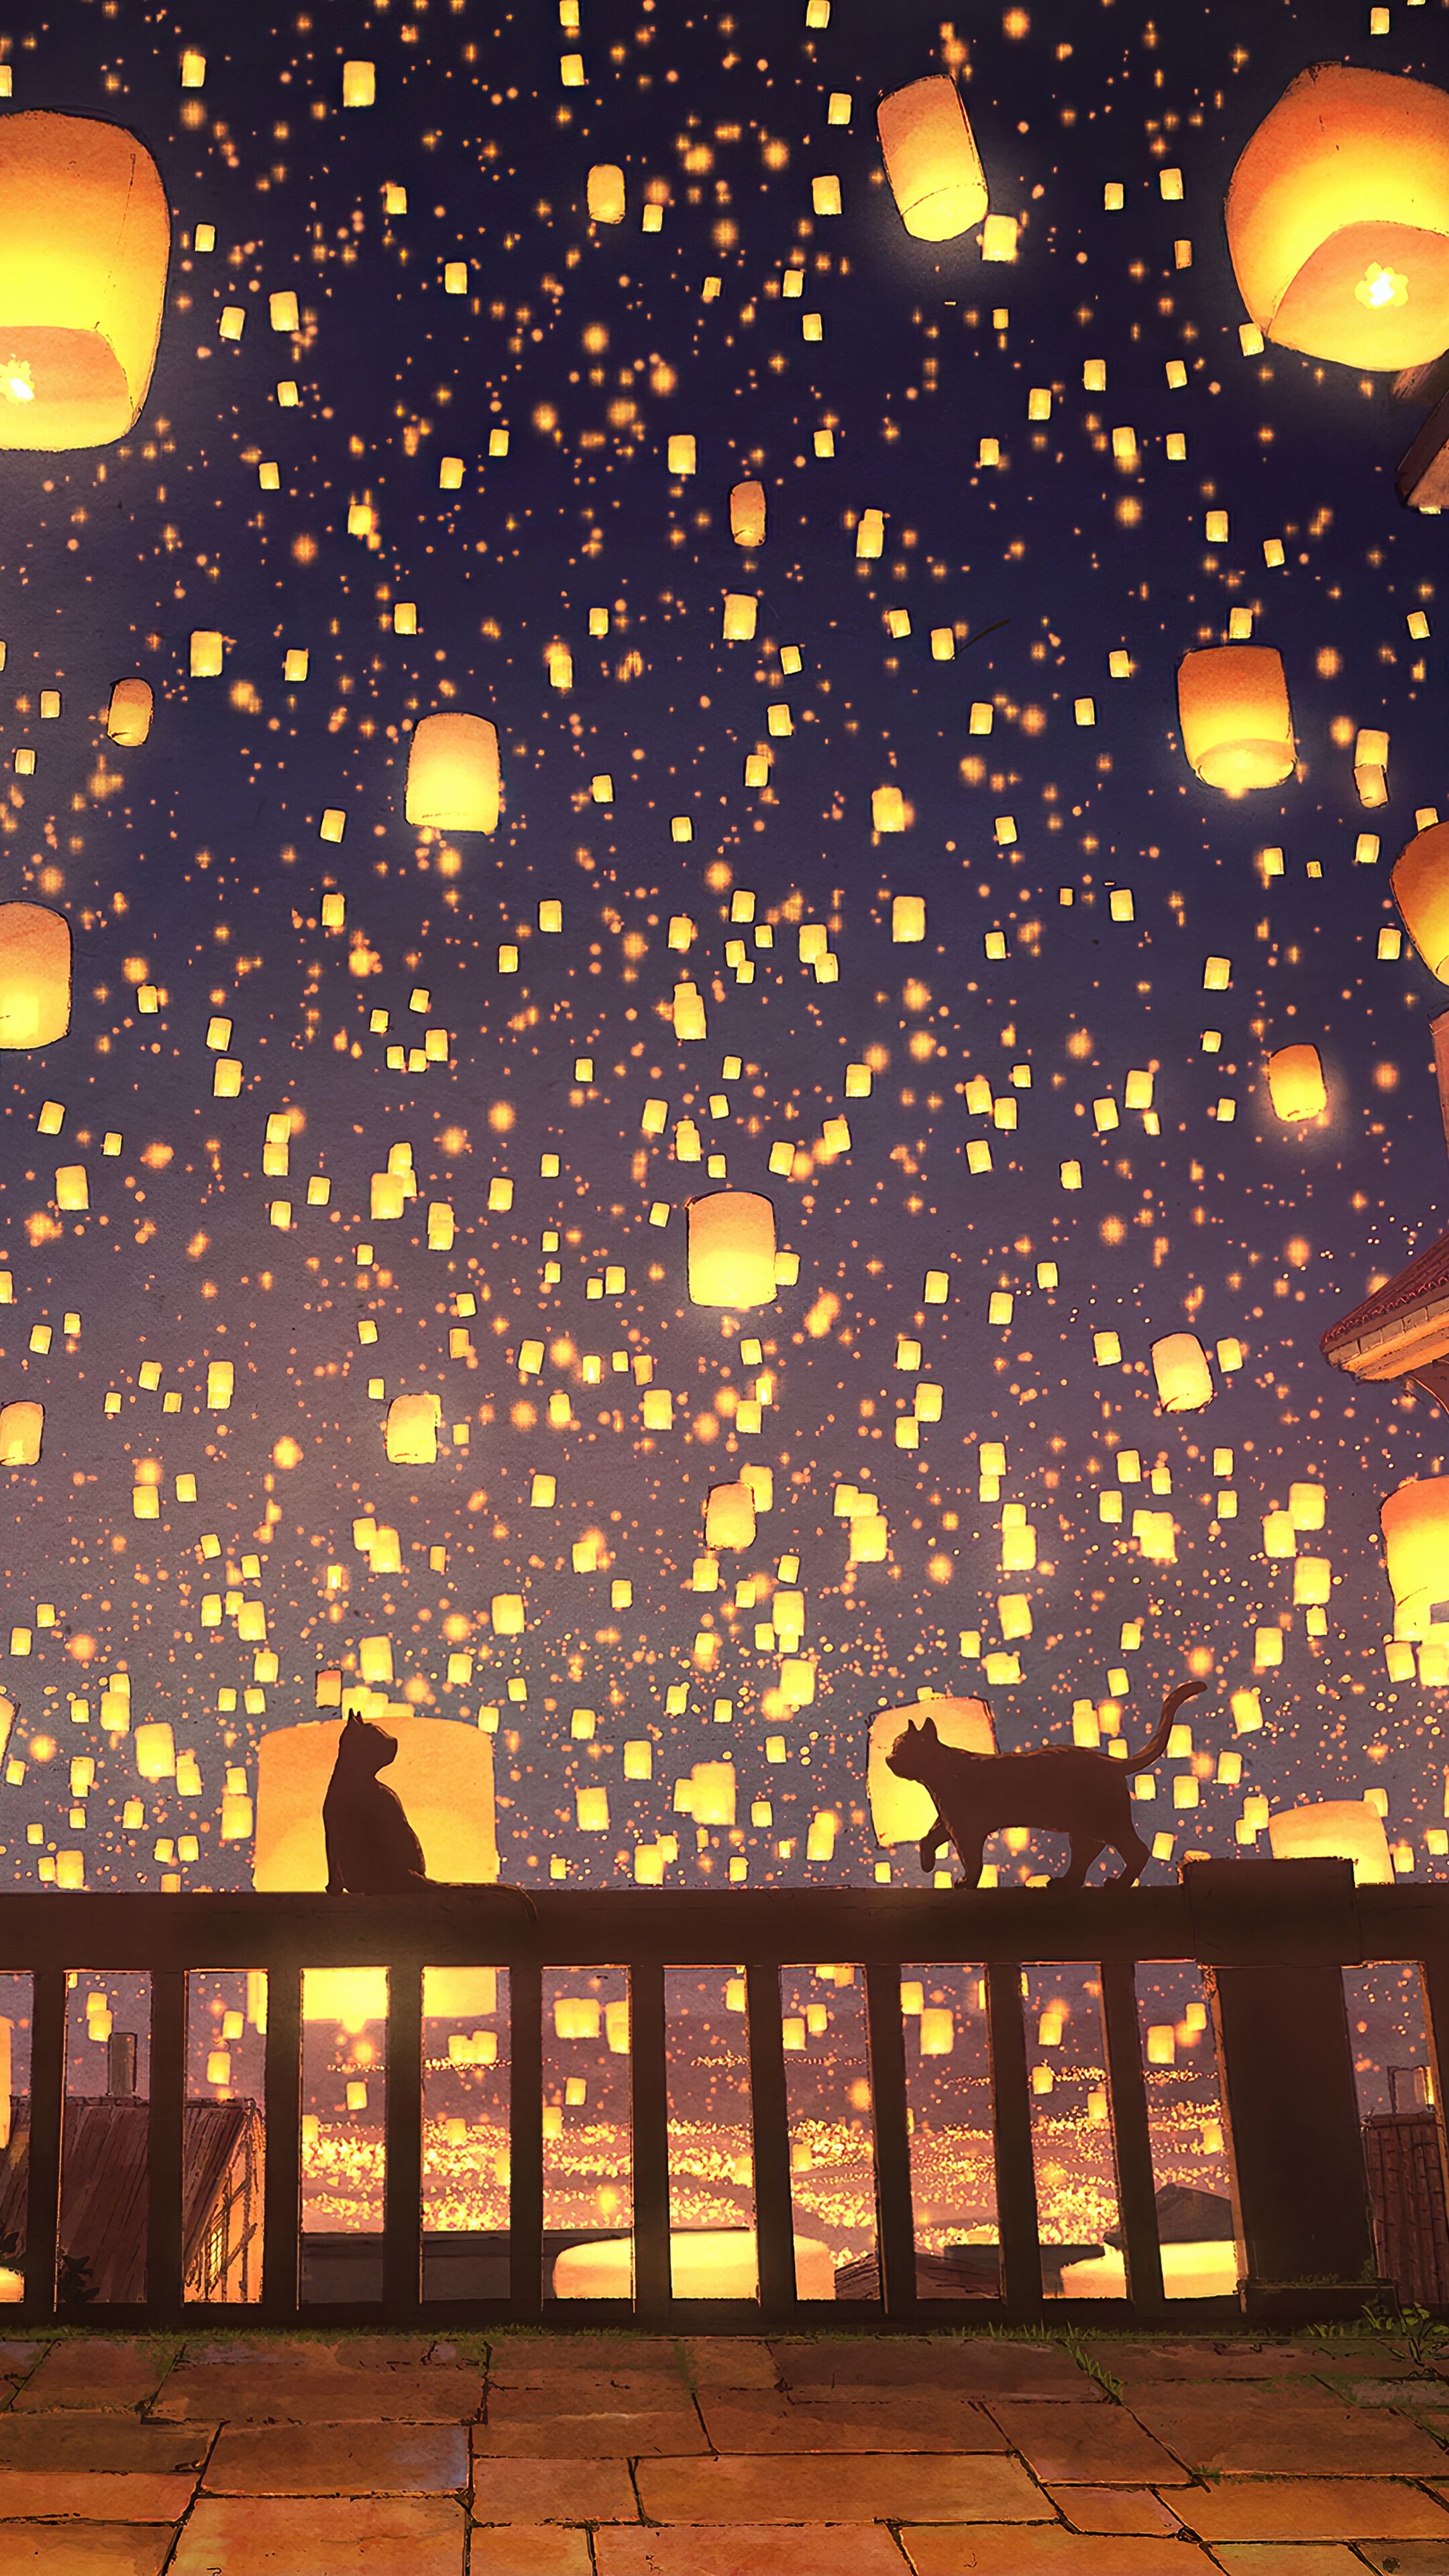 Anime, Sky Lantern, Cat, Night, Scenery, 4K phone HD Wallpaper, Image, Background, Photo and Picture HD Wallpaper